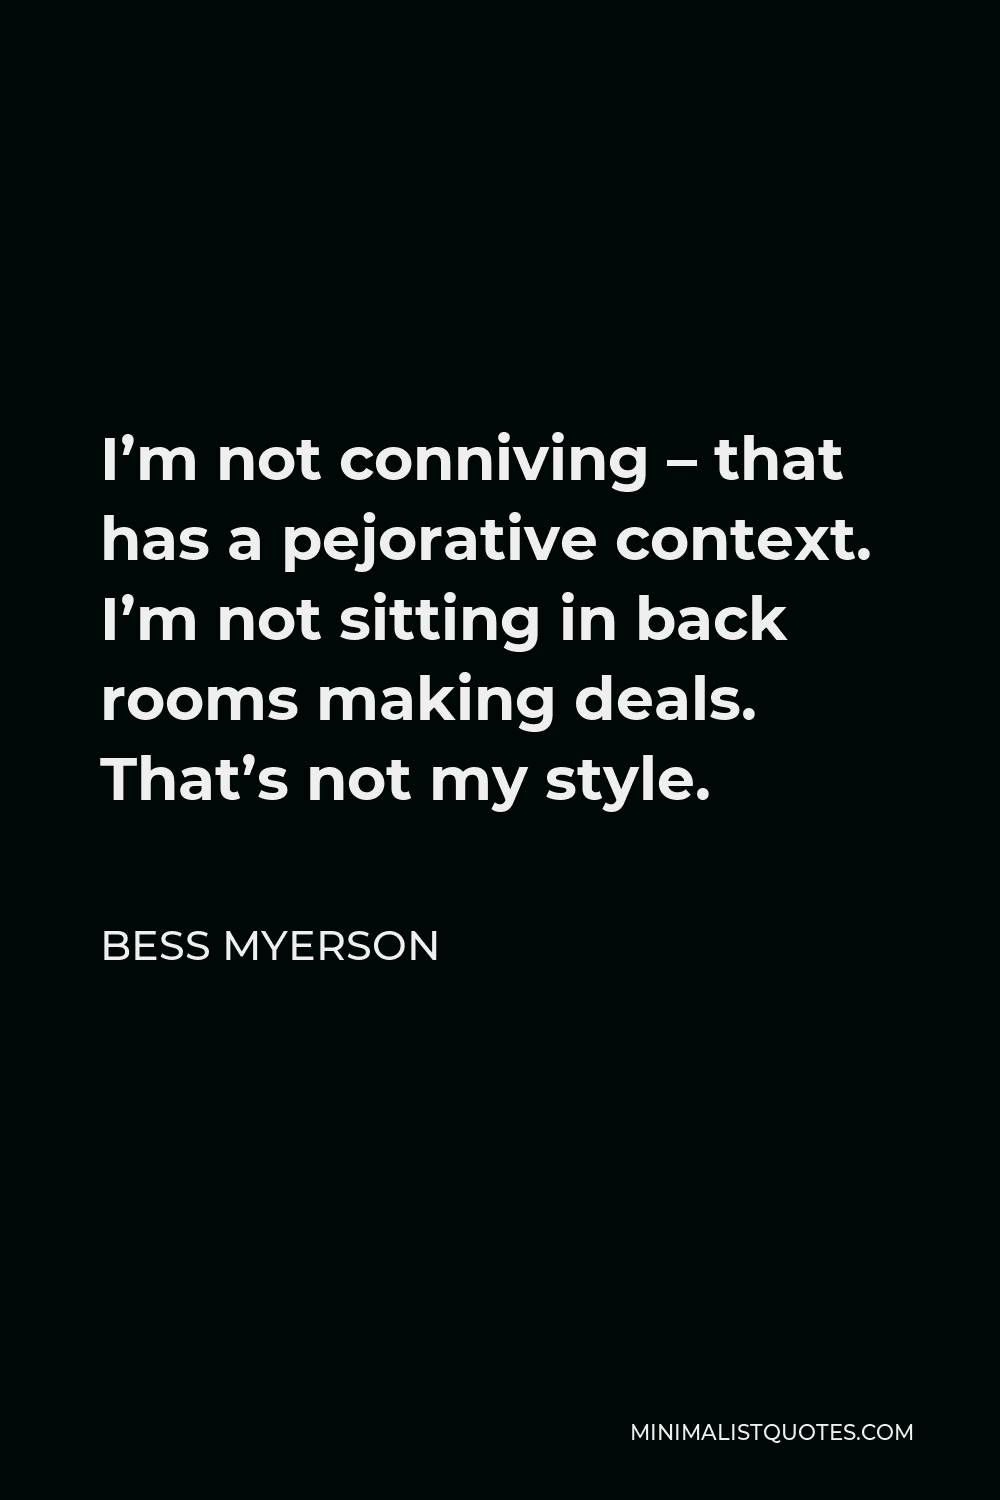 Bess Myerson Quote - I’m not conniving – that has a pejorative context. I’m not sitting in back rooms making deals. That’s not my style.